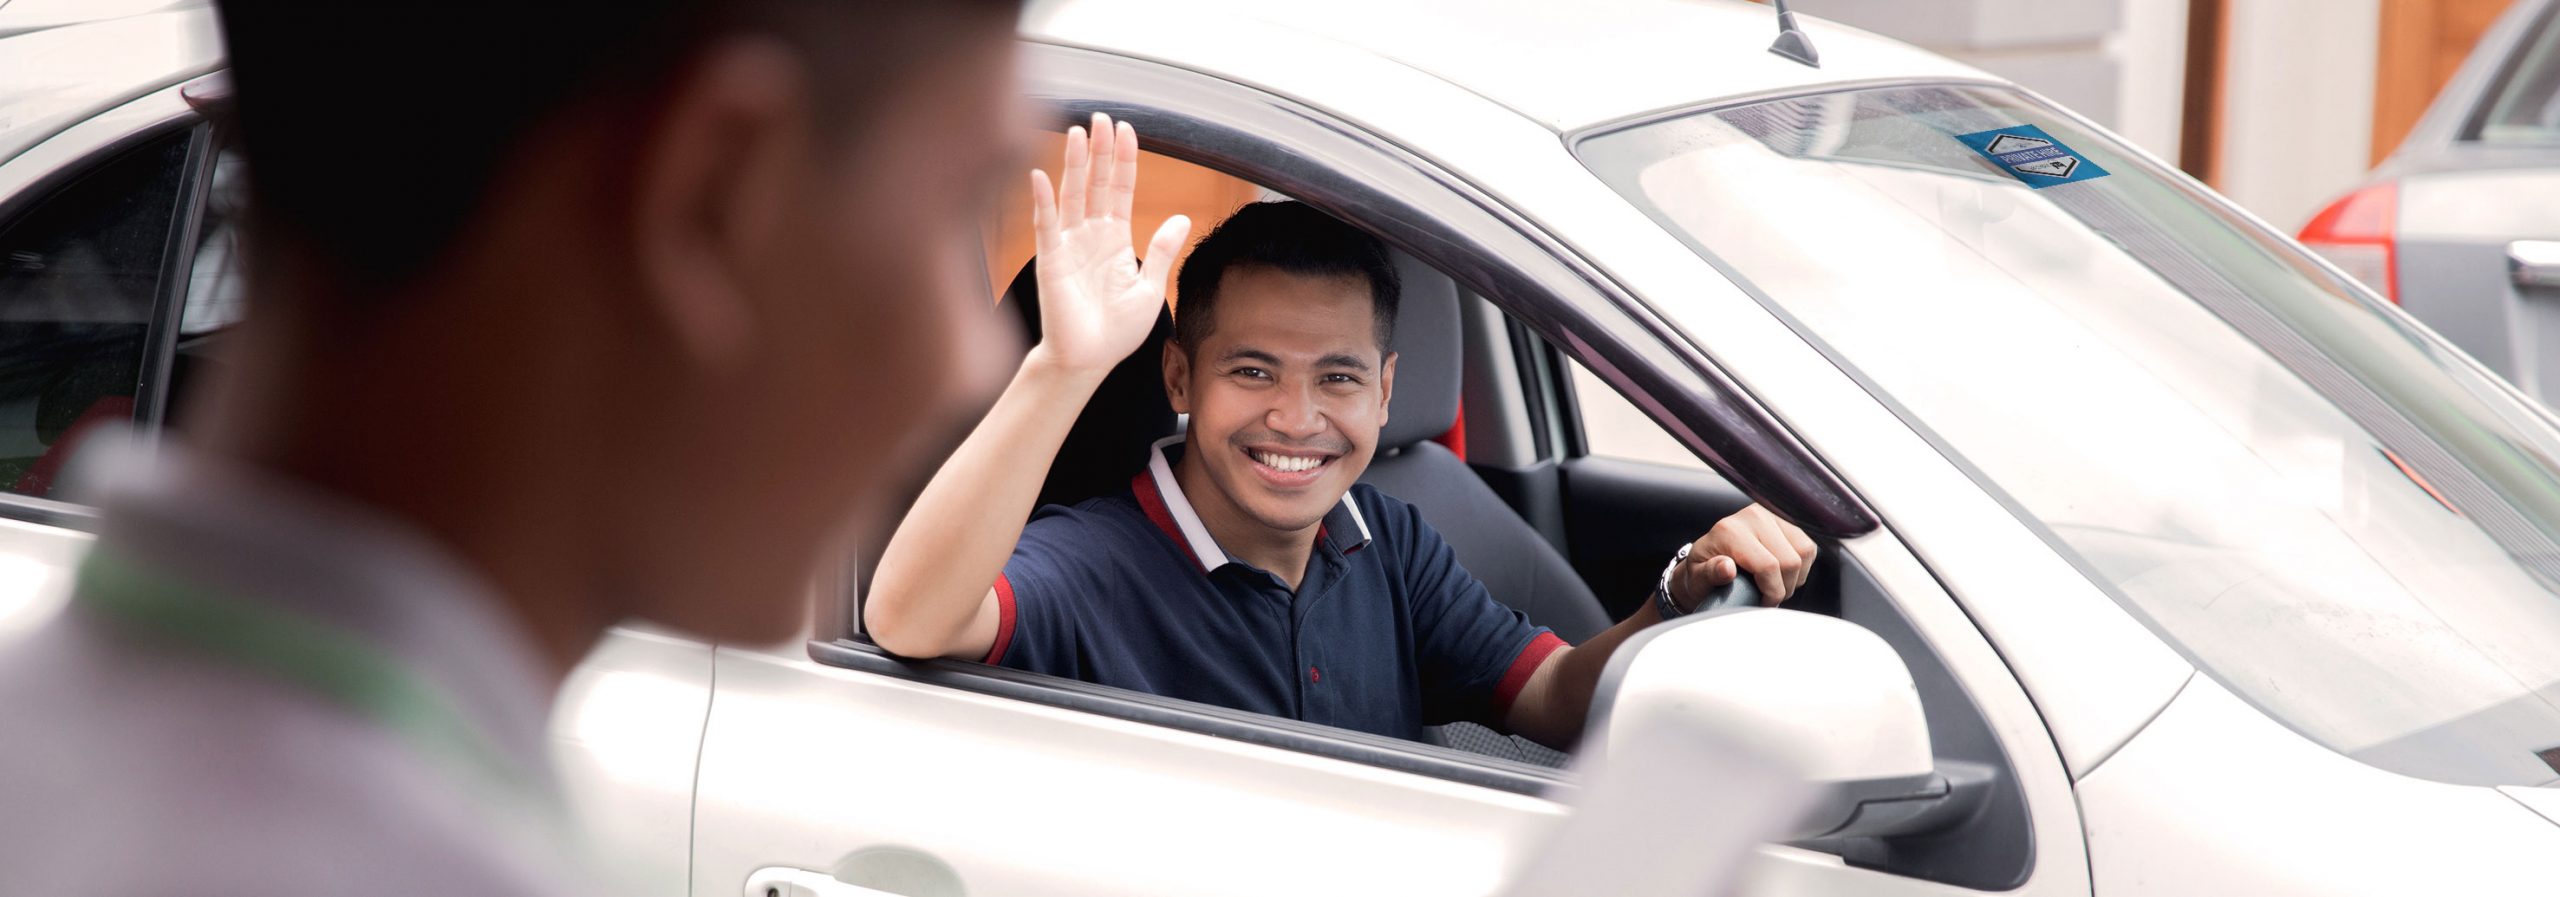 Enjoy These Benefits When You Join ComfortRIDE As A PHV Driver